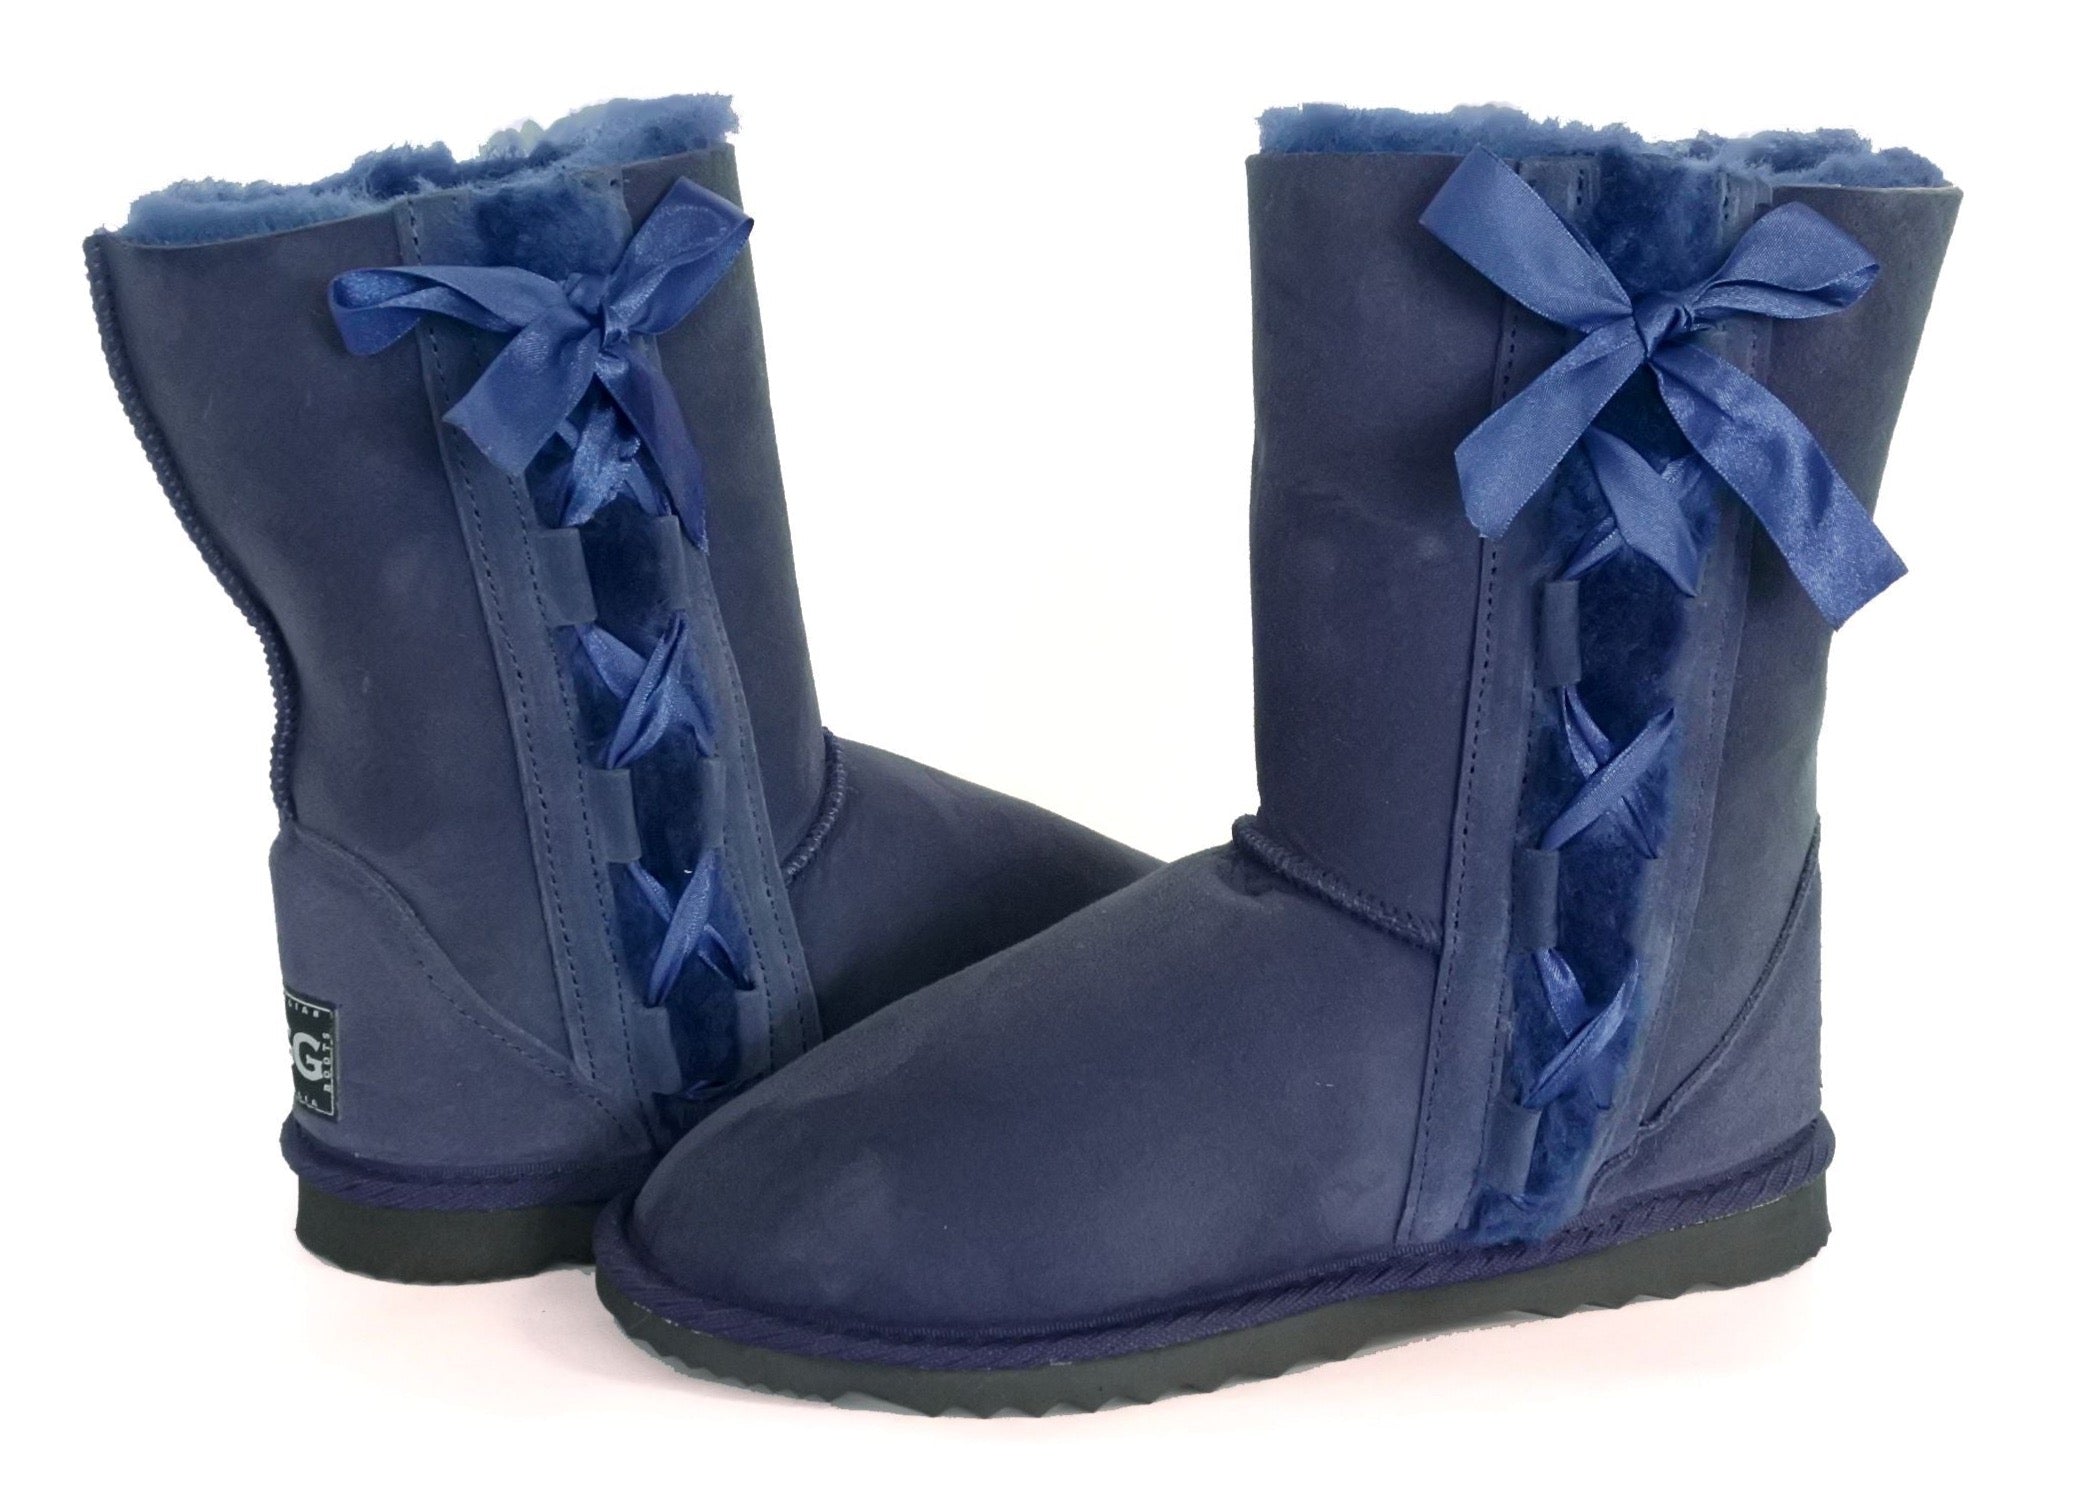 WOMEN'S XBOW BOOTS